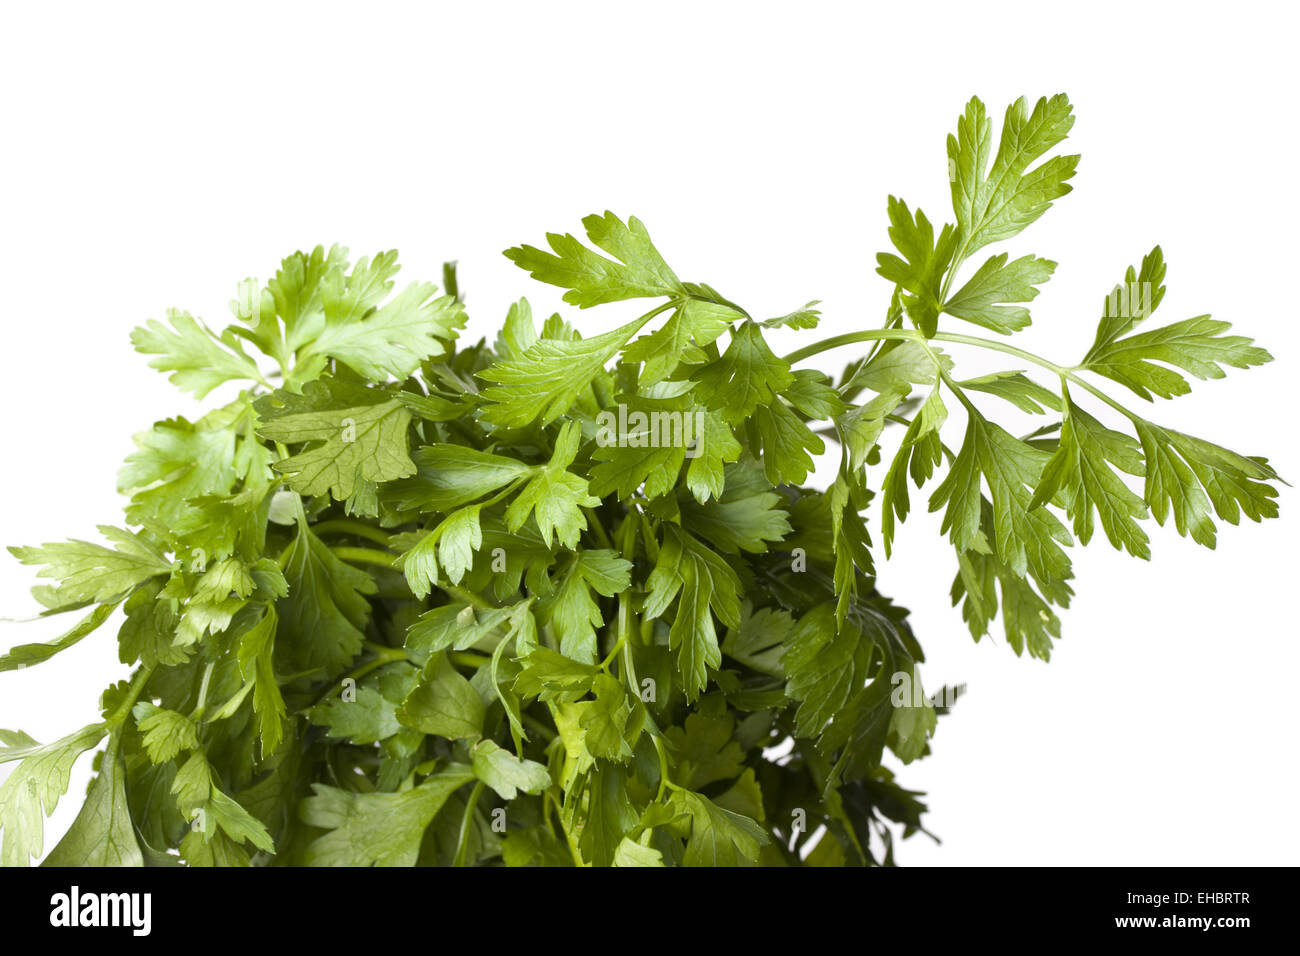 detail of a parsley plant Stock Photo